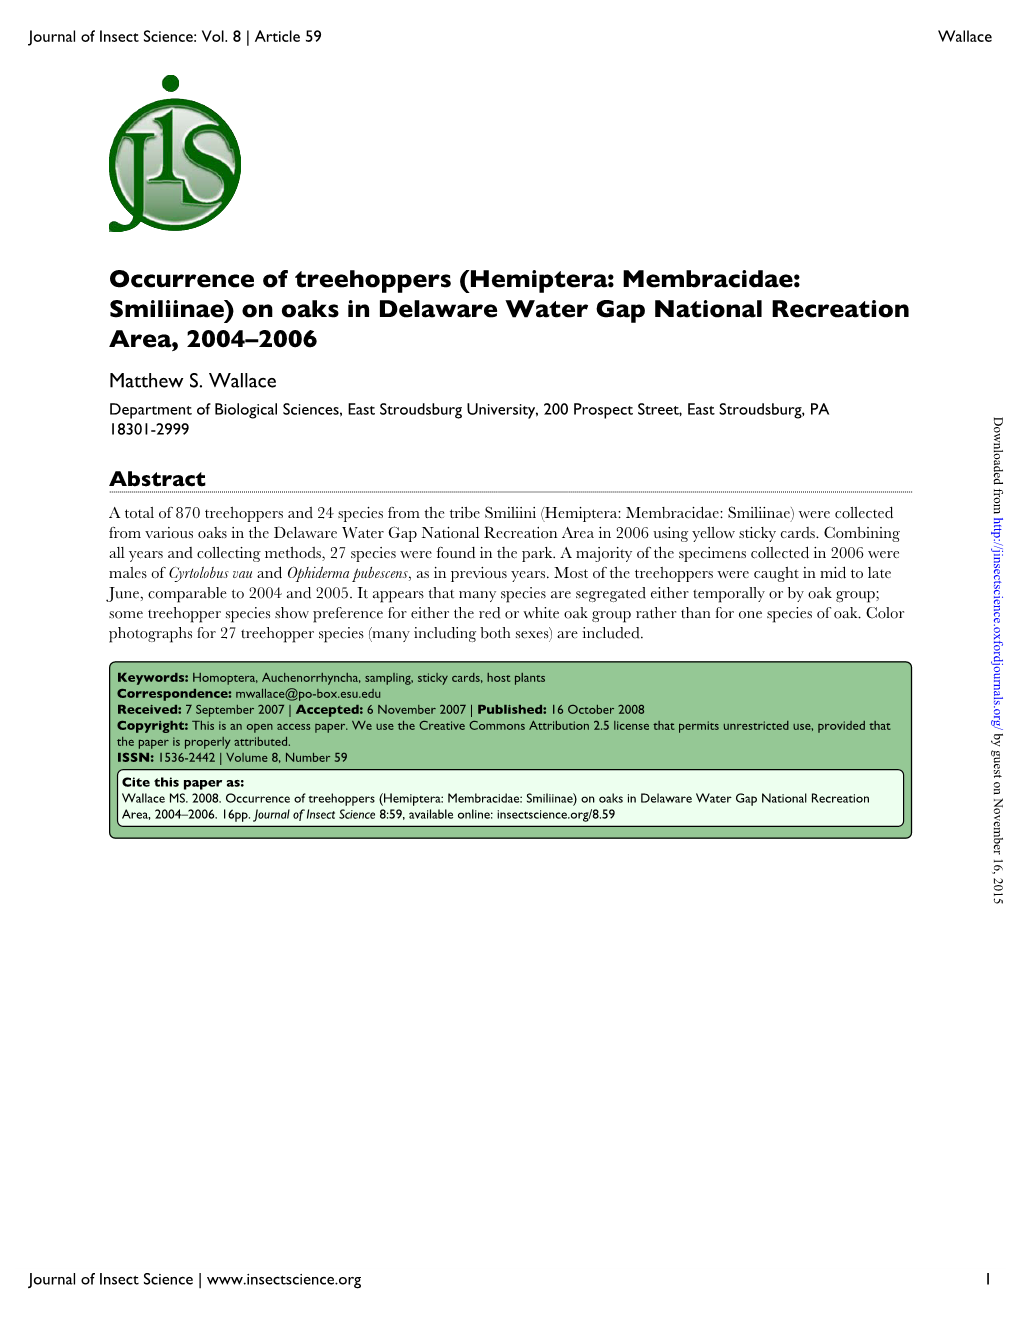 Occurrence of Treehoppers (Hemiptera: Membracidae: Smiliinae) on Oaks in Delaware Water Gap National Recreation Area, 2004–2006 Matthew S